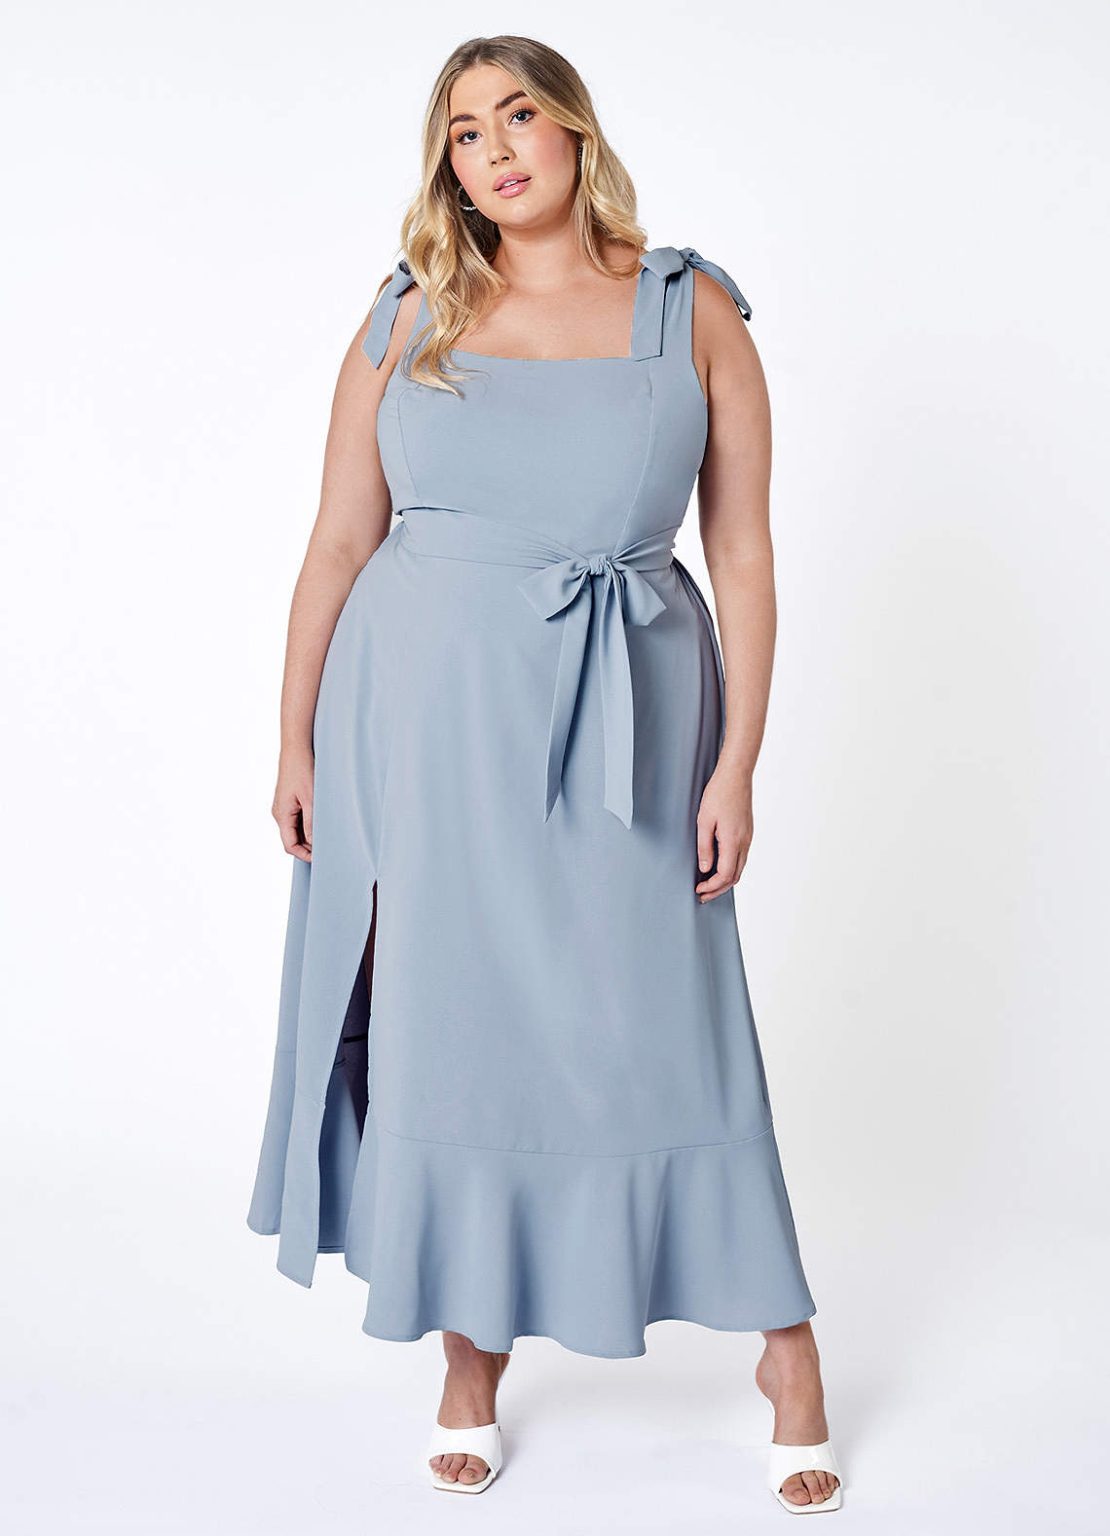 22 Flattering Wedding Guest Dresses That Hide the Belly Area